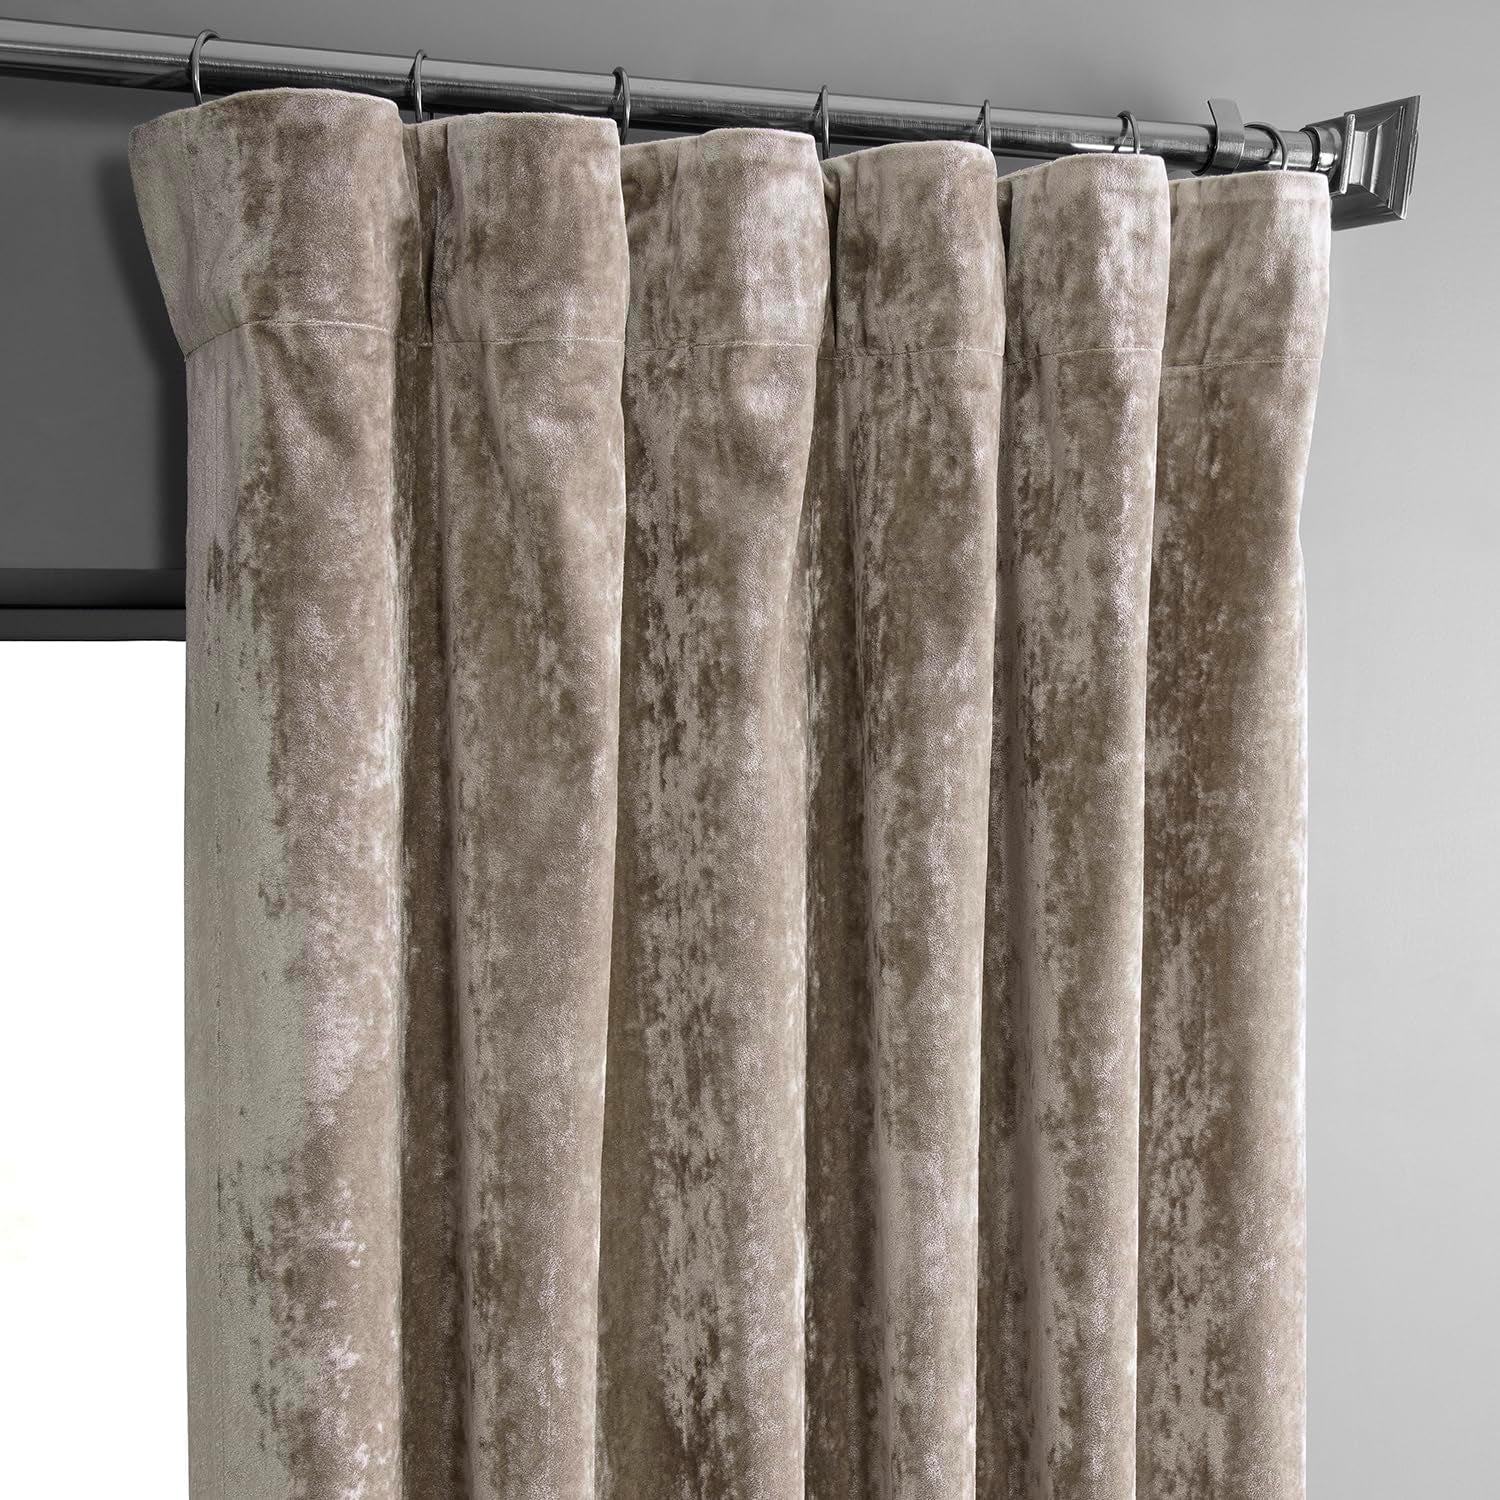 HPD Half Price Drapes Lush Crush Velvet Curtains - Room Darkening Curtain 96 Inches Long for Bedroom & Living Room, Luxury Look, Rod Pocket Design, (1 Panel), 50W X 96L, Taupe  Exclusive Fabrics & Furnishings   